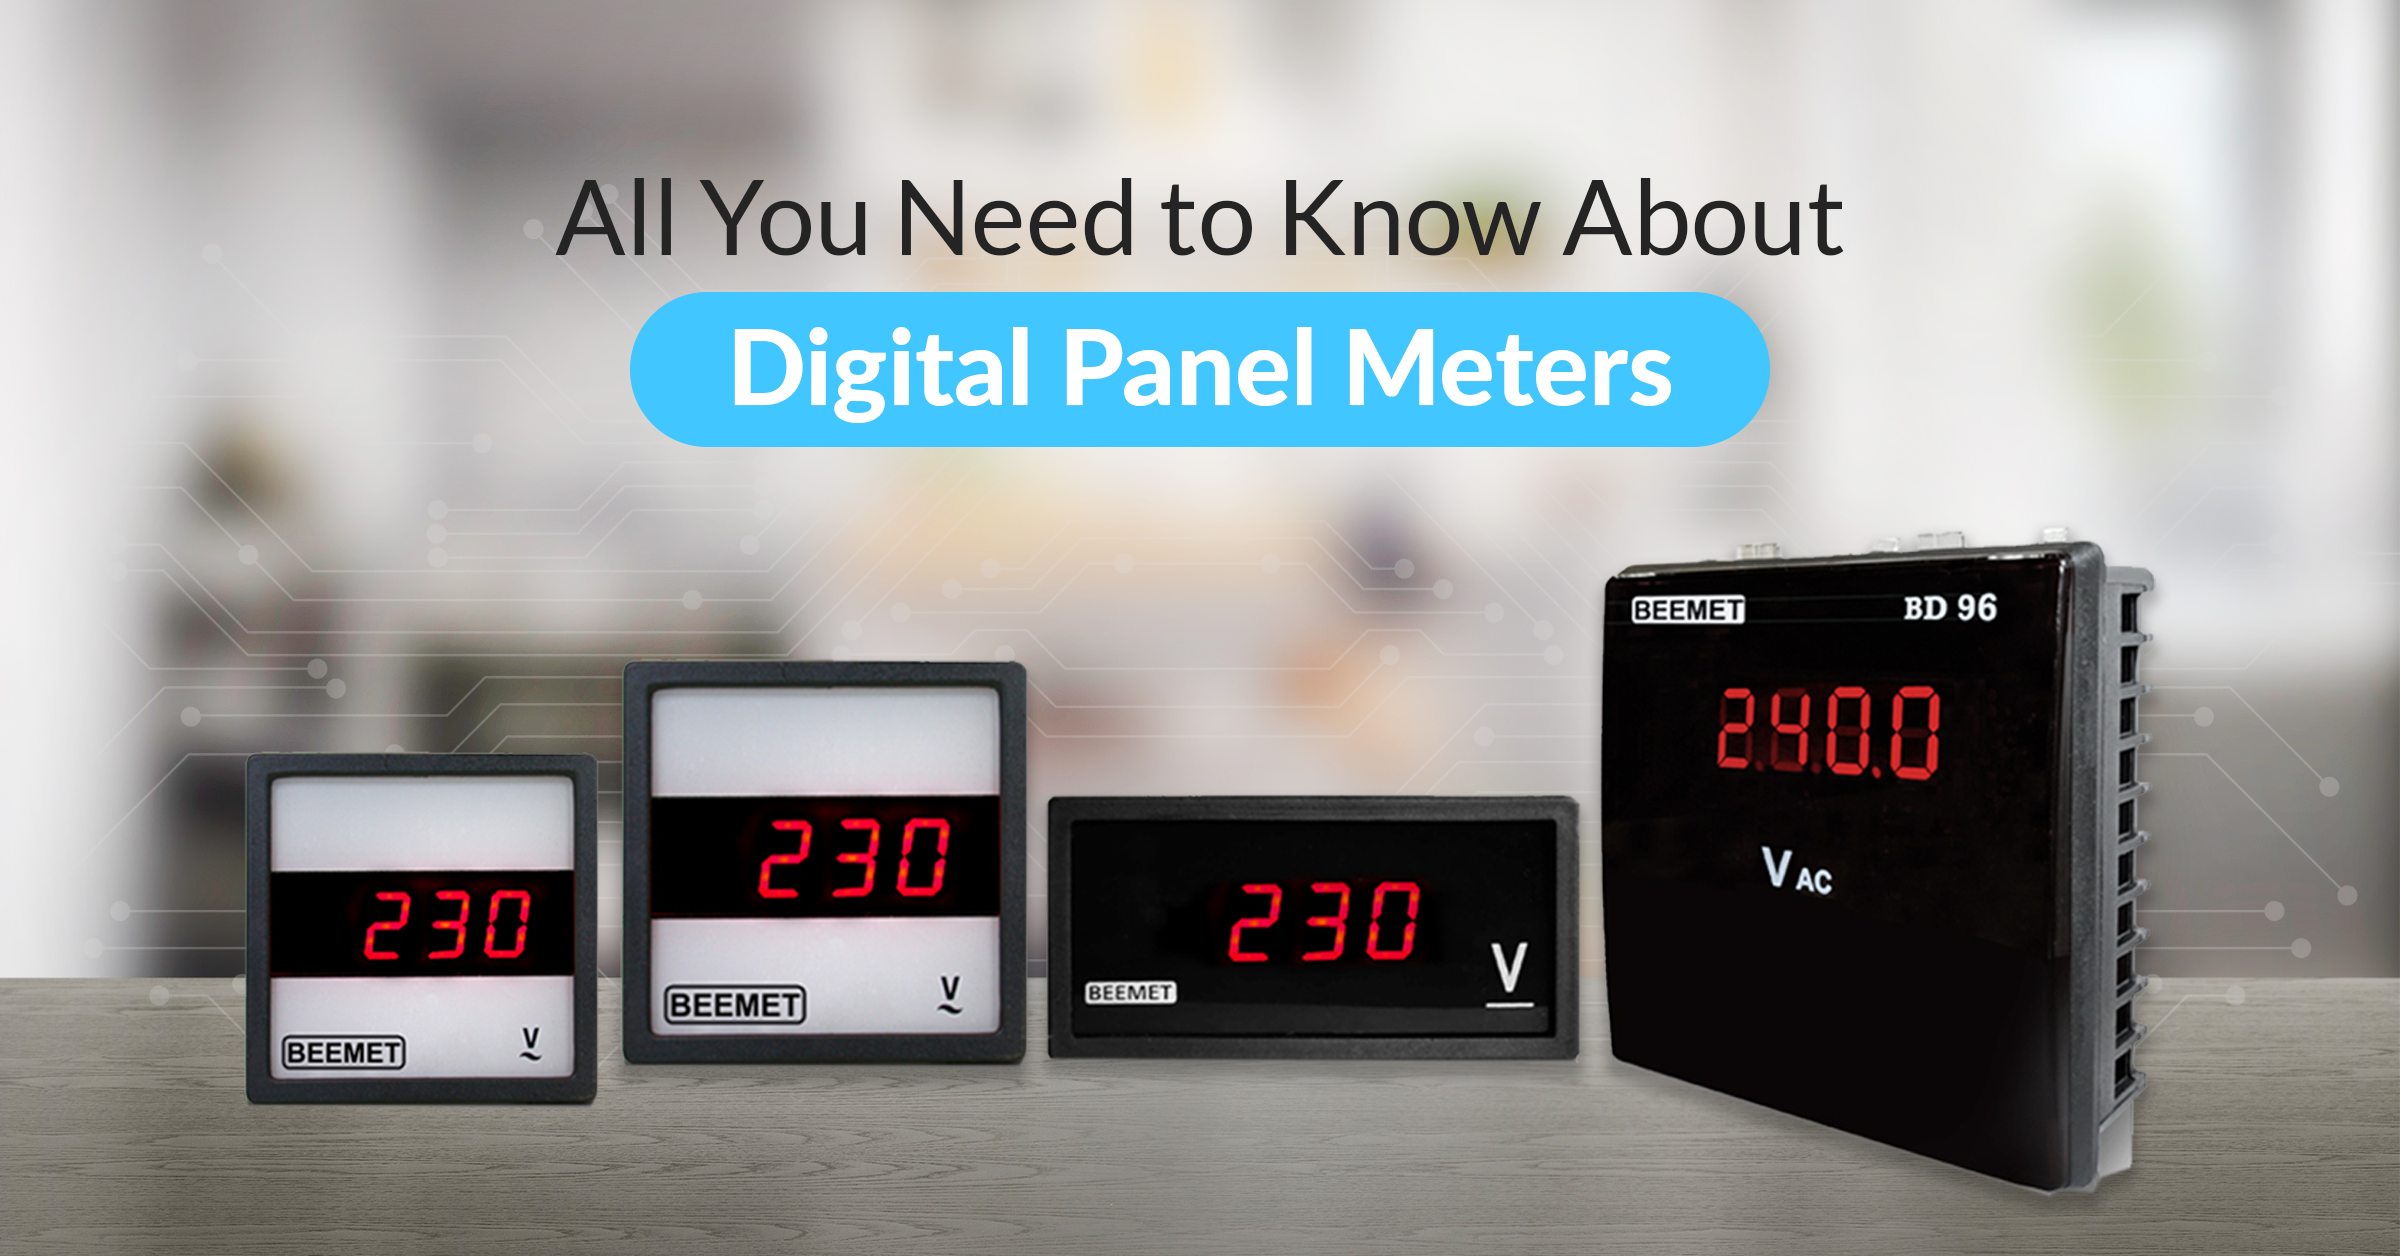 All You Need to Know About Digital Panel Meters - a guidebook